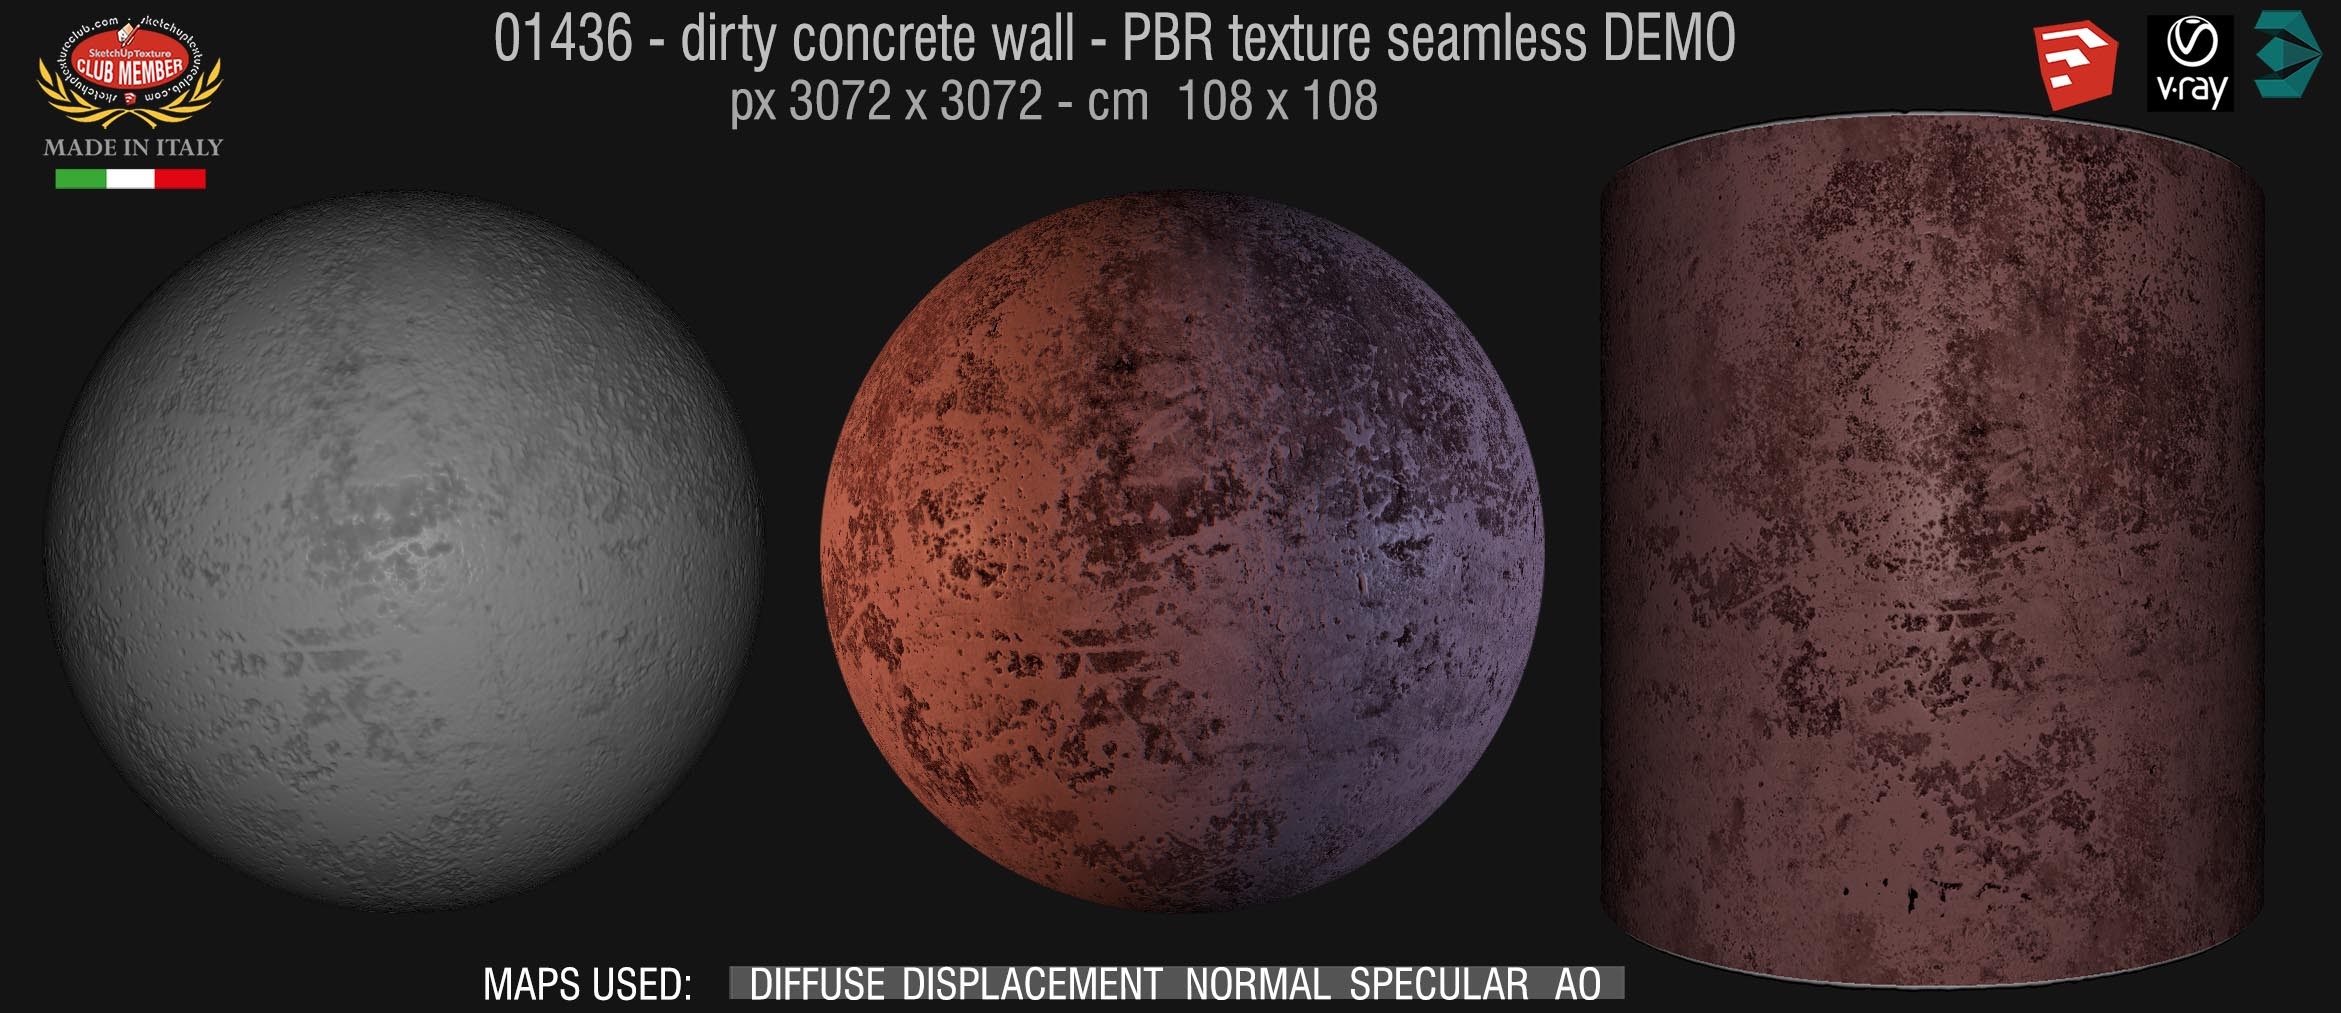 01436 Concrete bare dirty wall PBR texture seamless DEMO